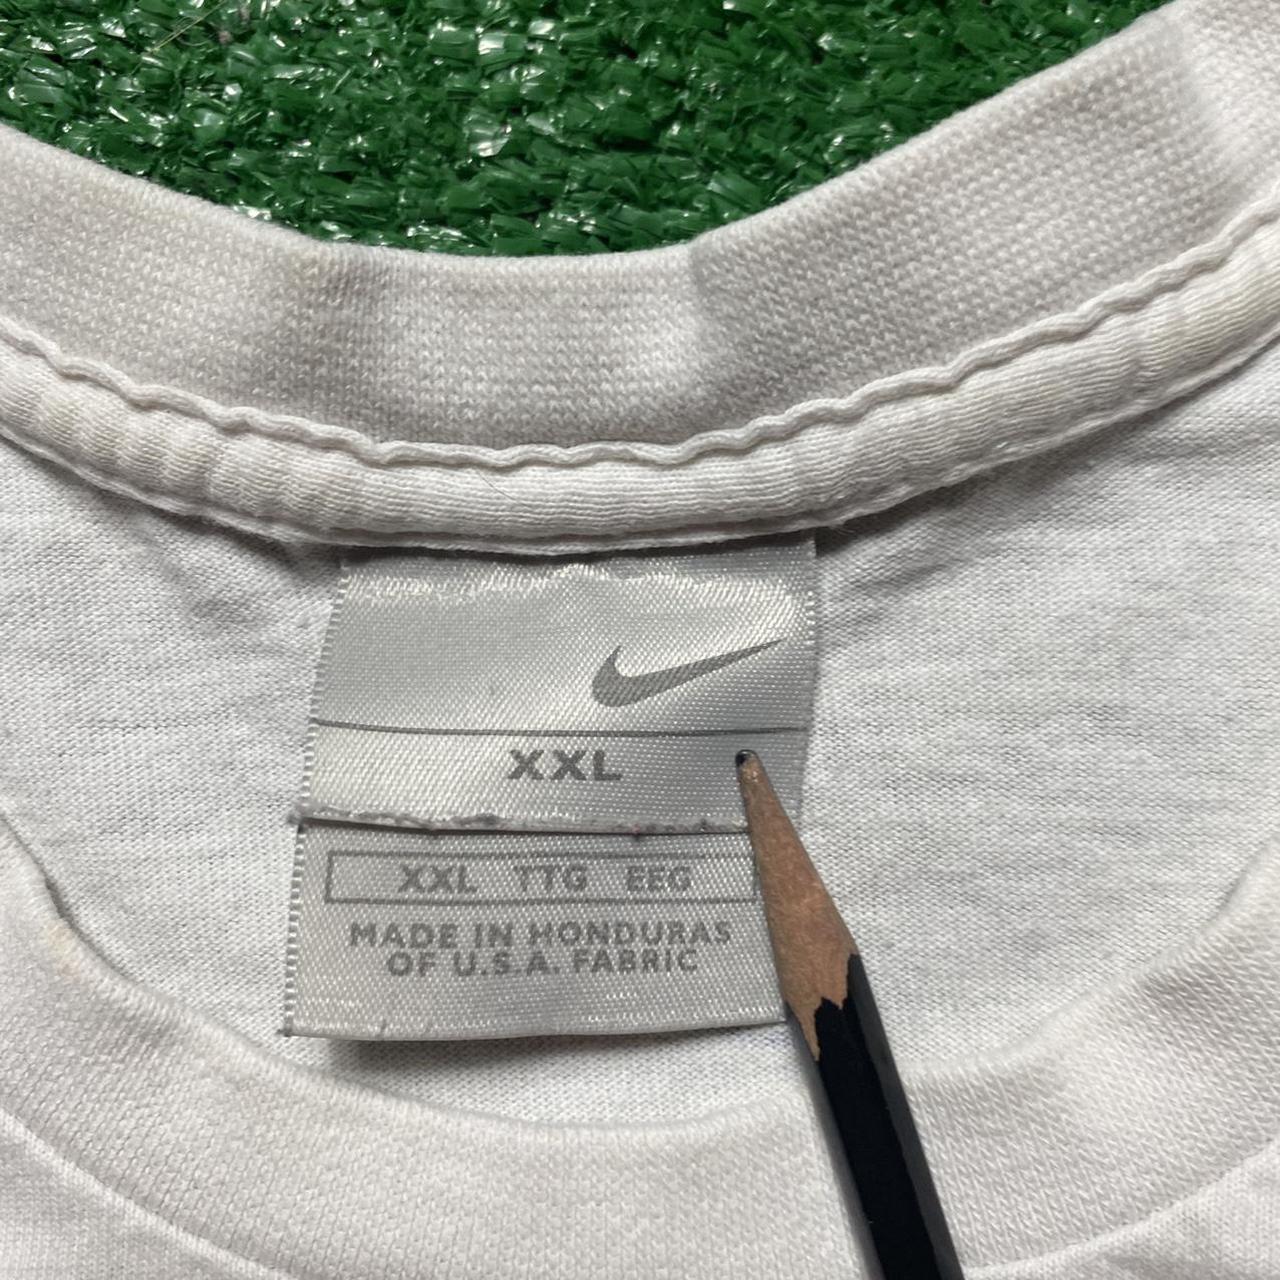 Product Image 2 - y2k nike shirt. no stains